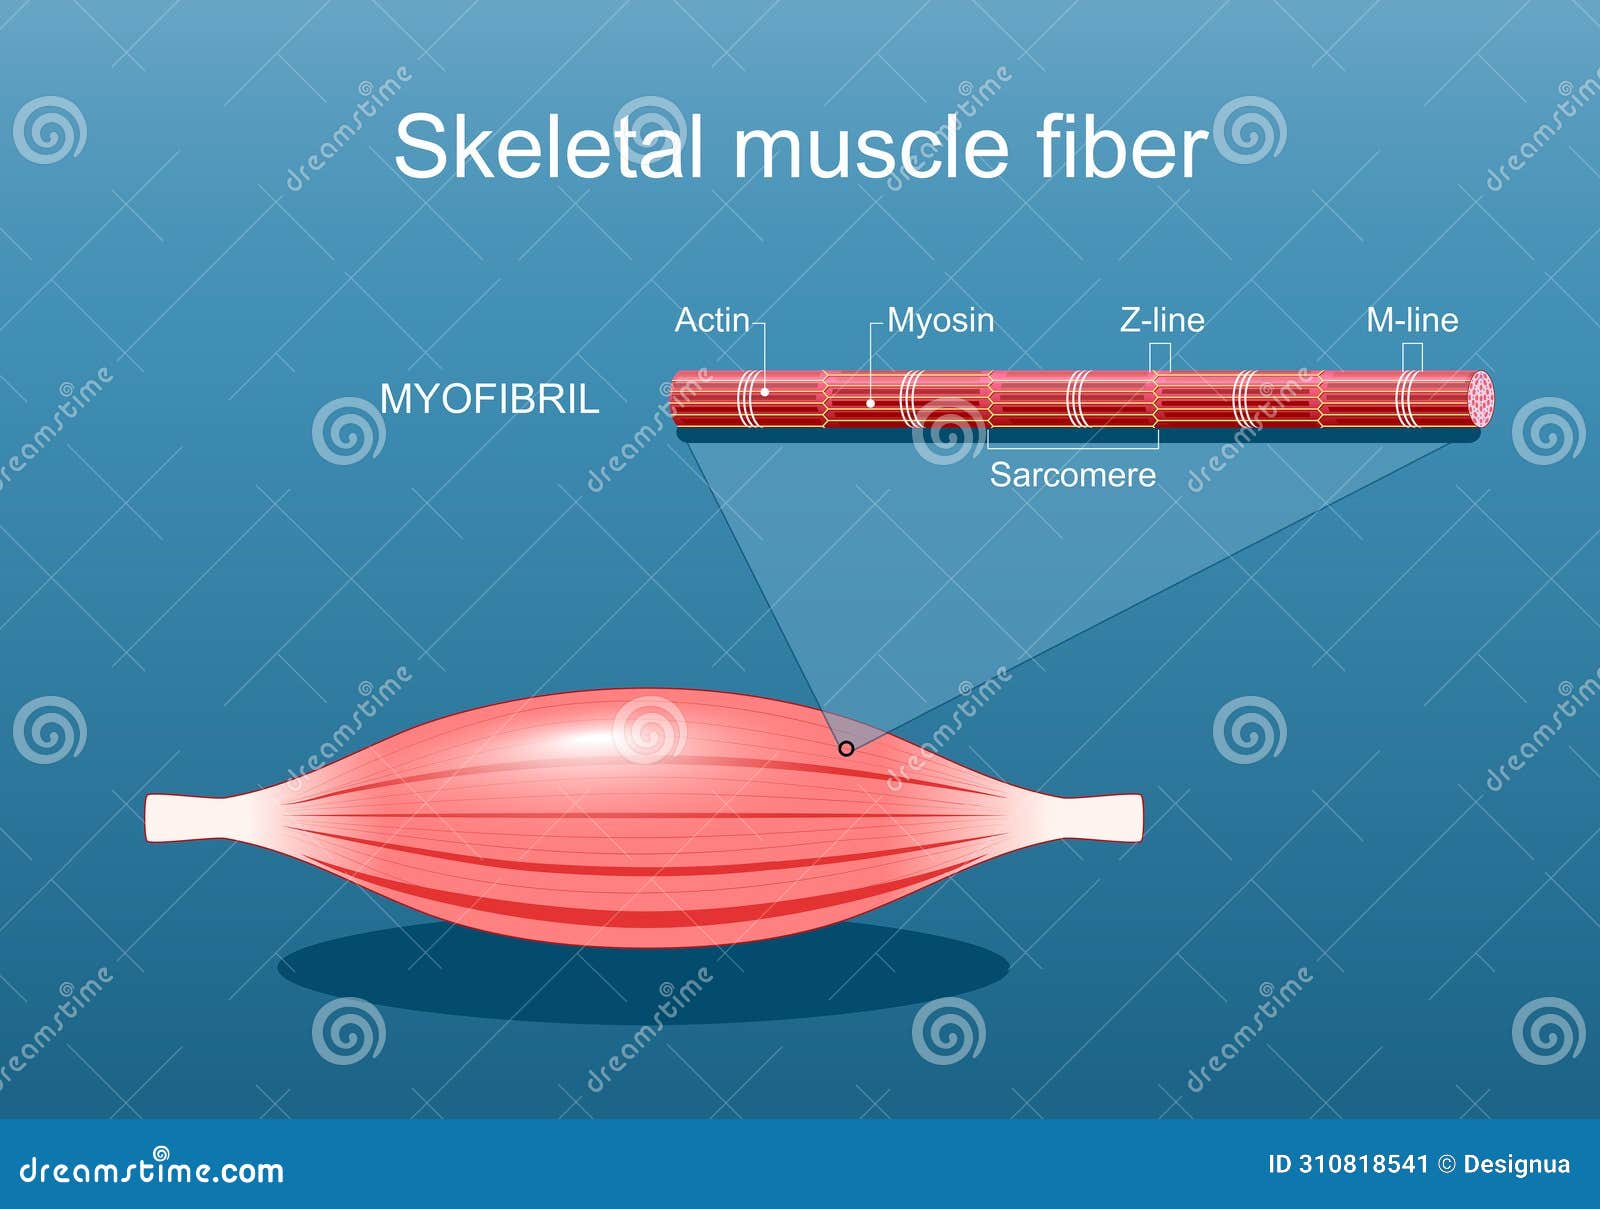 anatomy of a skeletal muscle fiber. myofibril structure